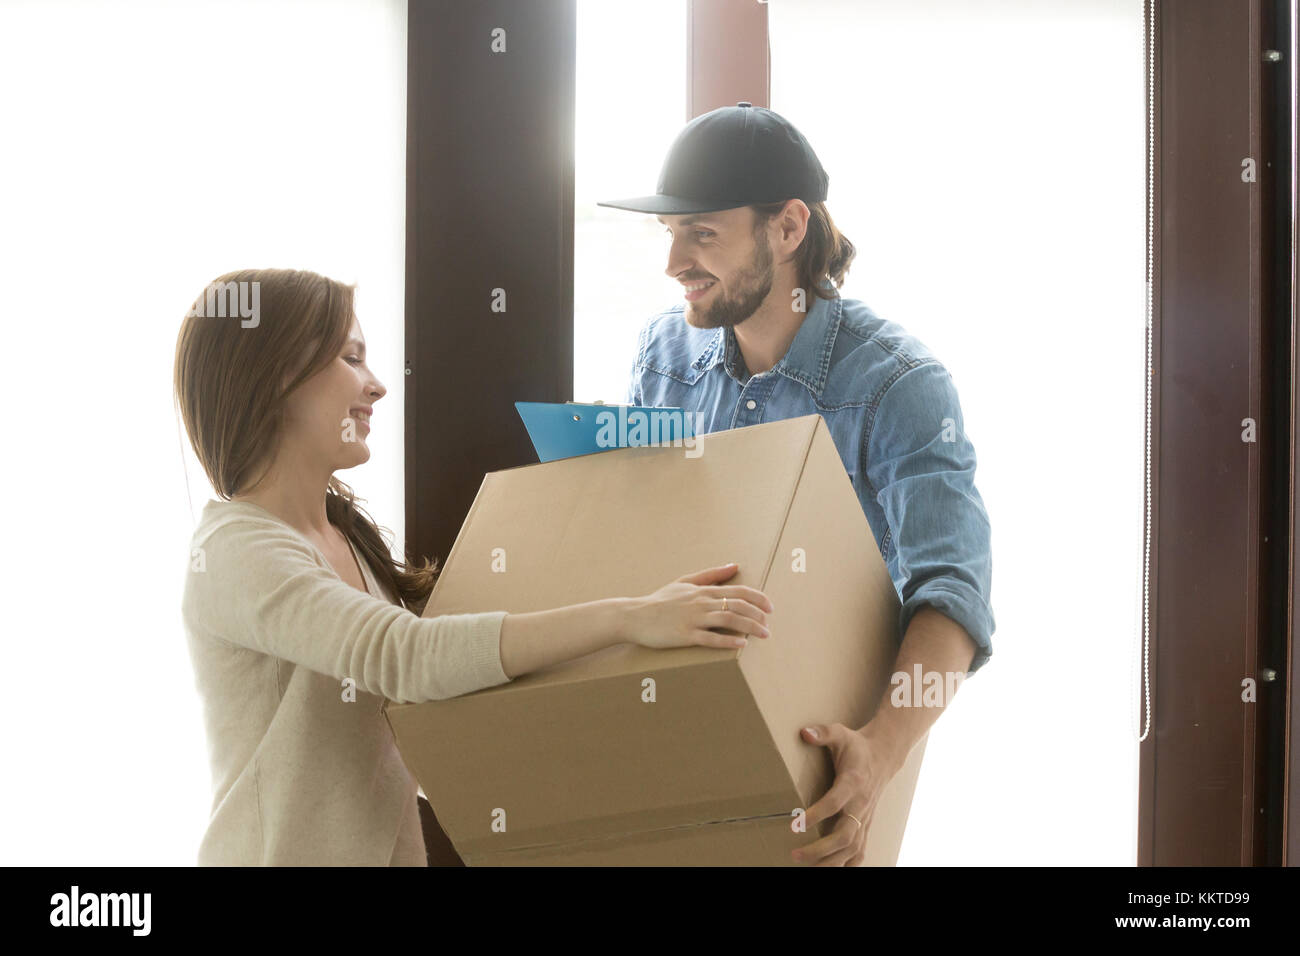 Delivery service concept, woman receiving box from courier at ho Stock Photo